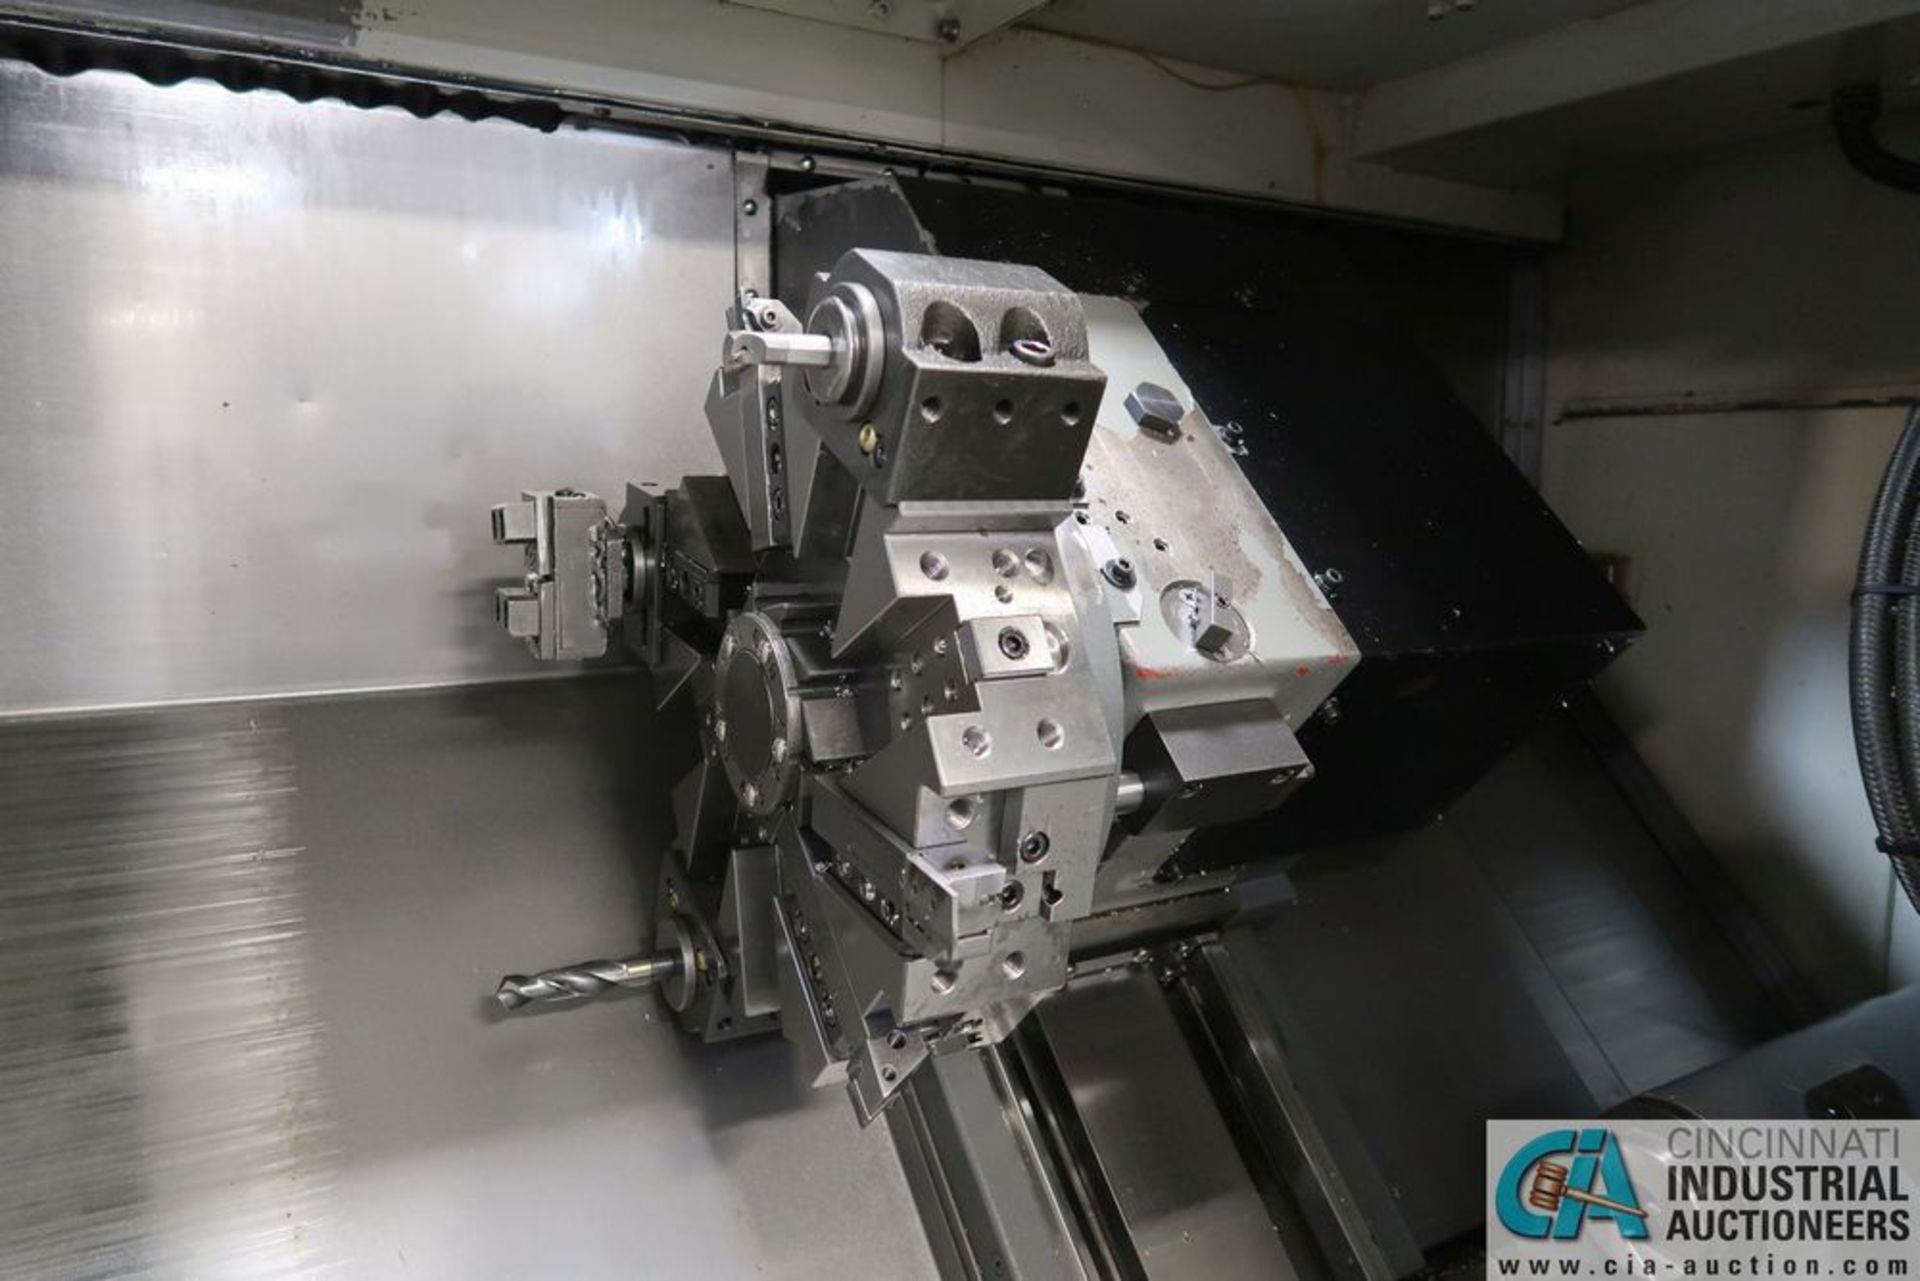 SAMSUNG SL20/500 CNC TURNING CENTER; S/N 12H440853, 8" 3-JAW CHUCK, **Rigging Fee Due $500.00** - Image 8 of 14